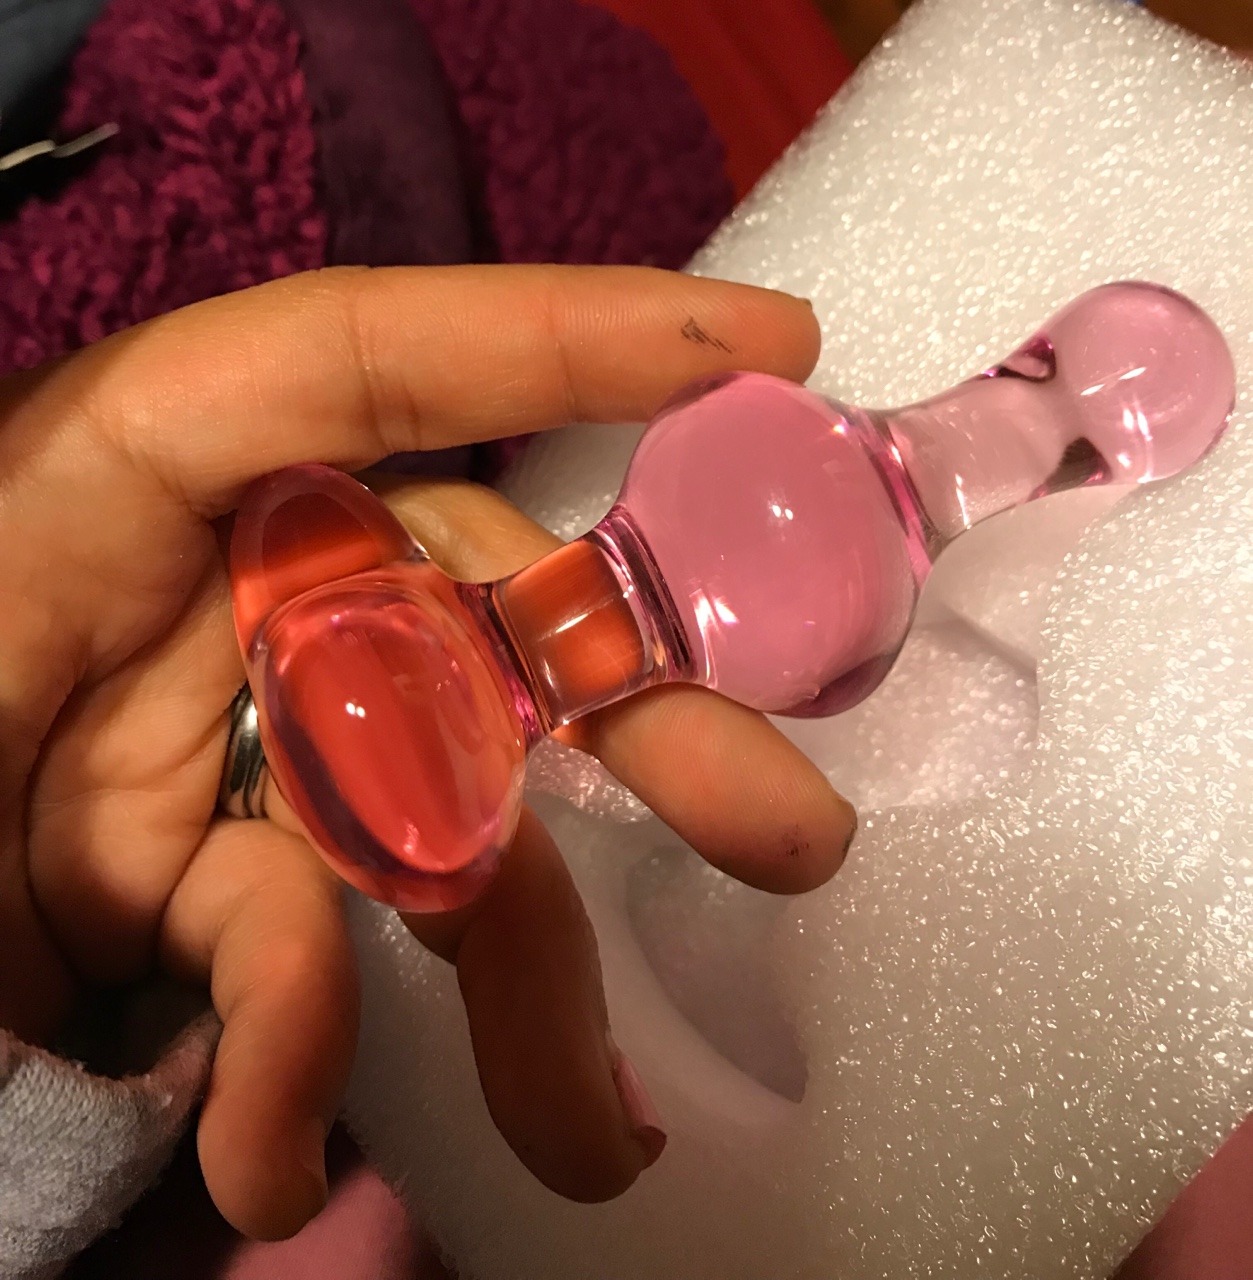 ashprincessmidna:  I got a new anal toy today! I can’t wait to shoot another set